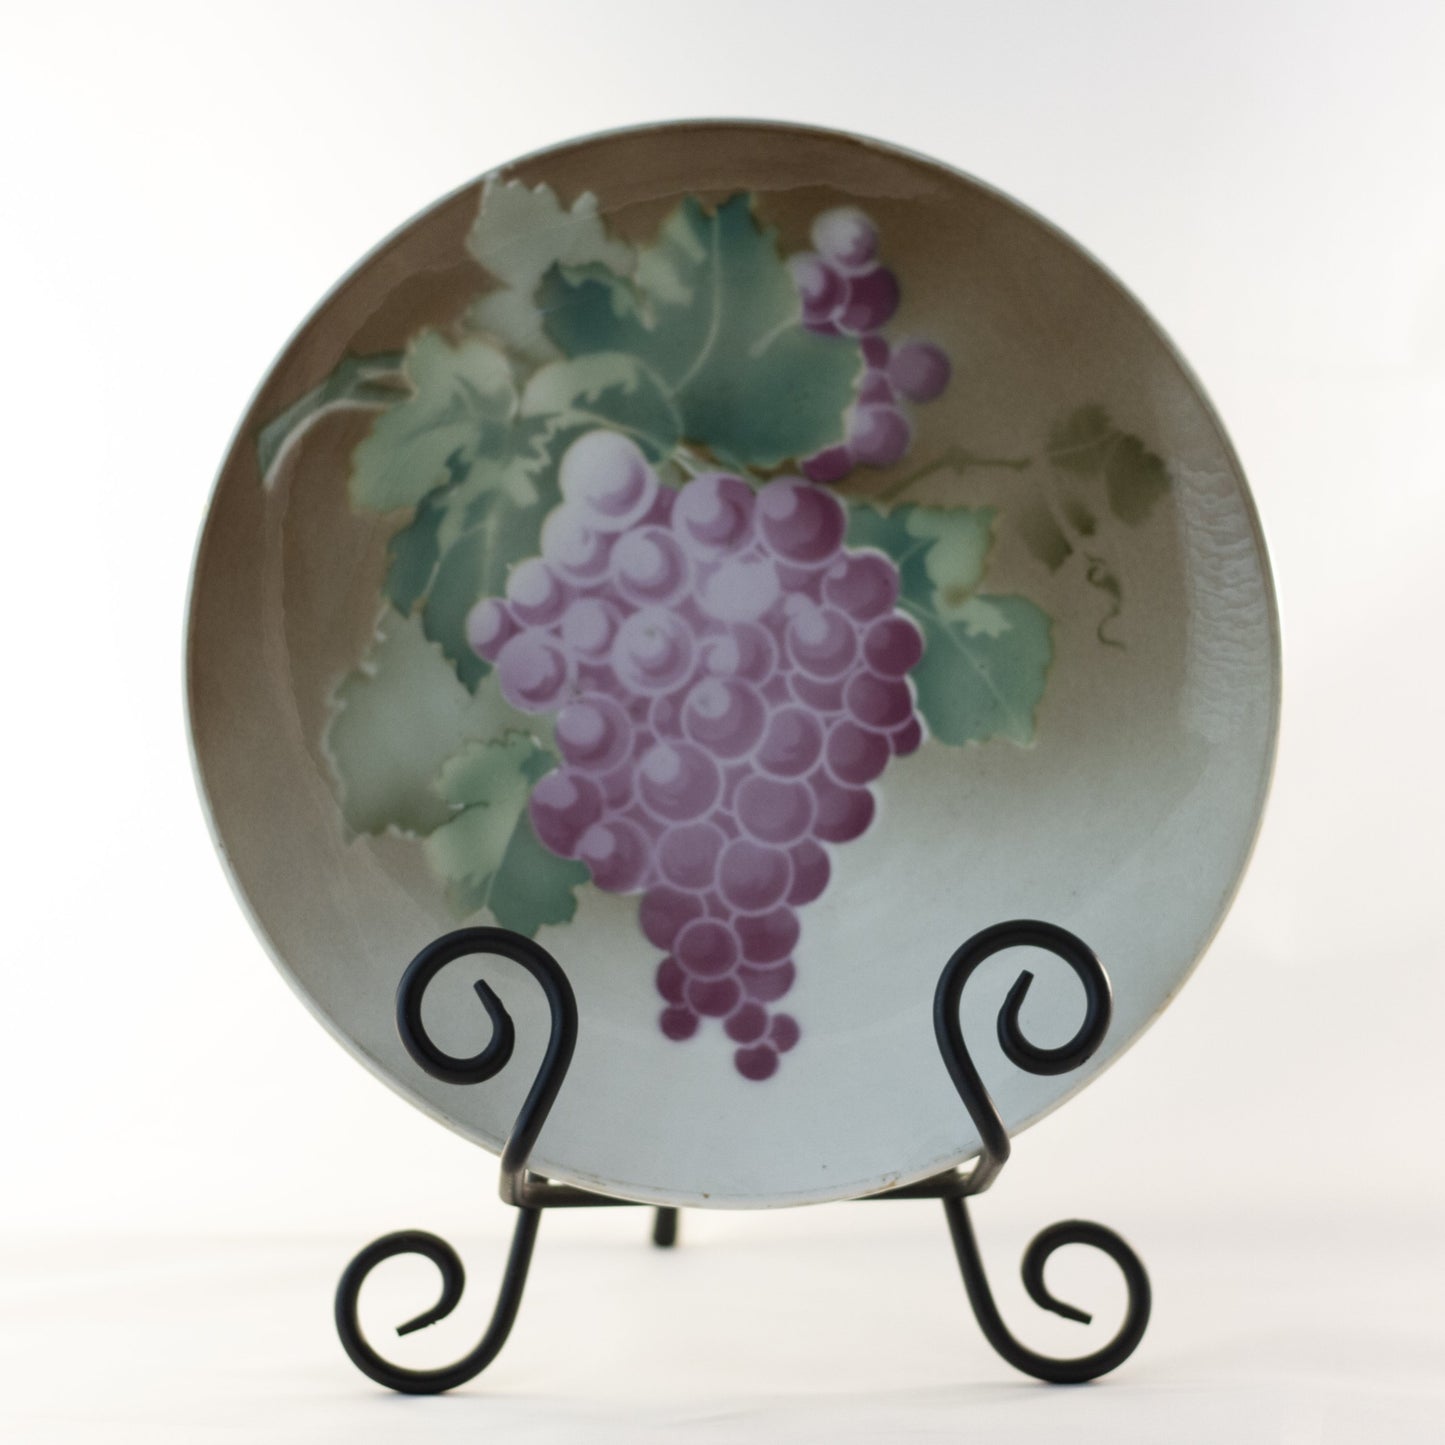 K & G LUNÉVILLE FRENCH FAIENCE PLATE HAND PAINTED GRAPES 8 ½” Circa 1900